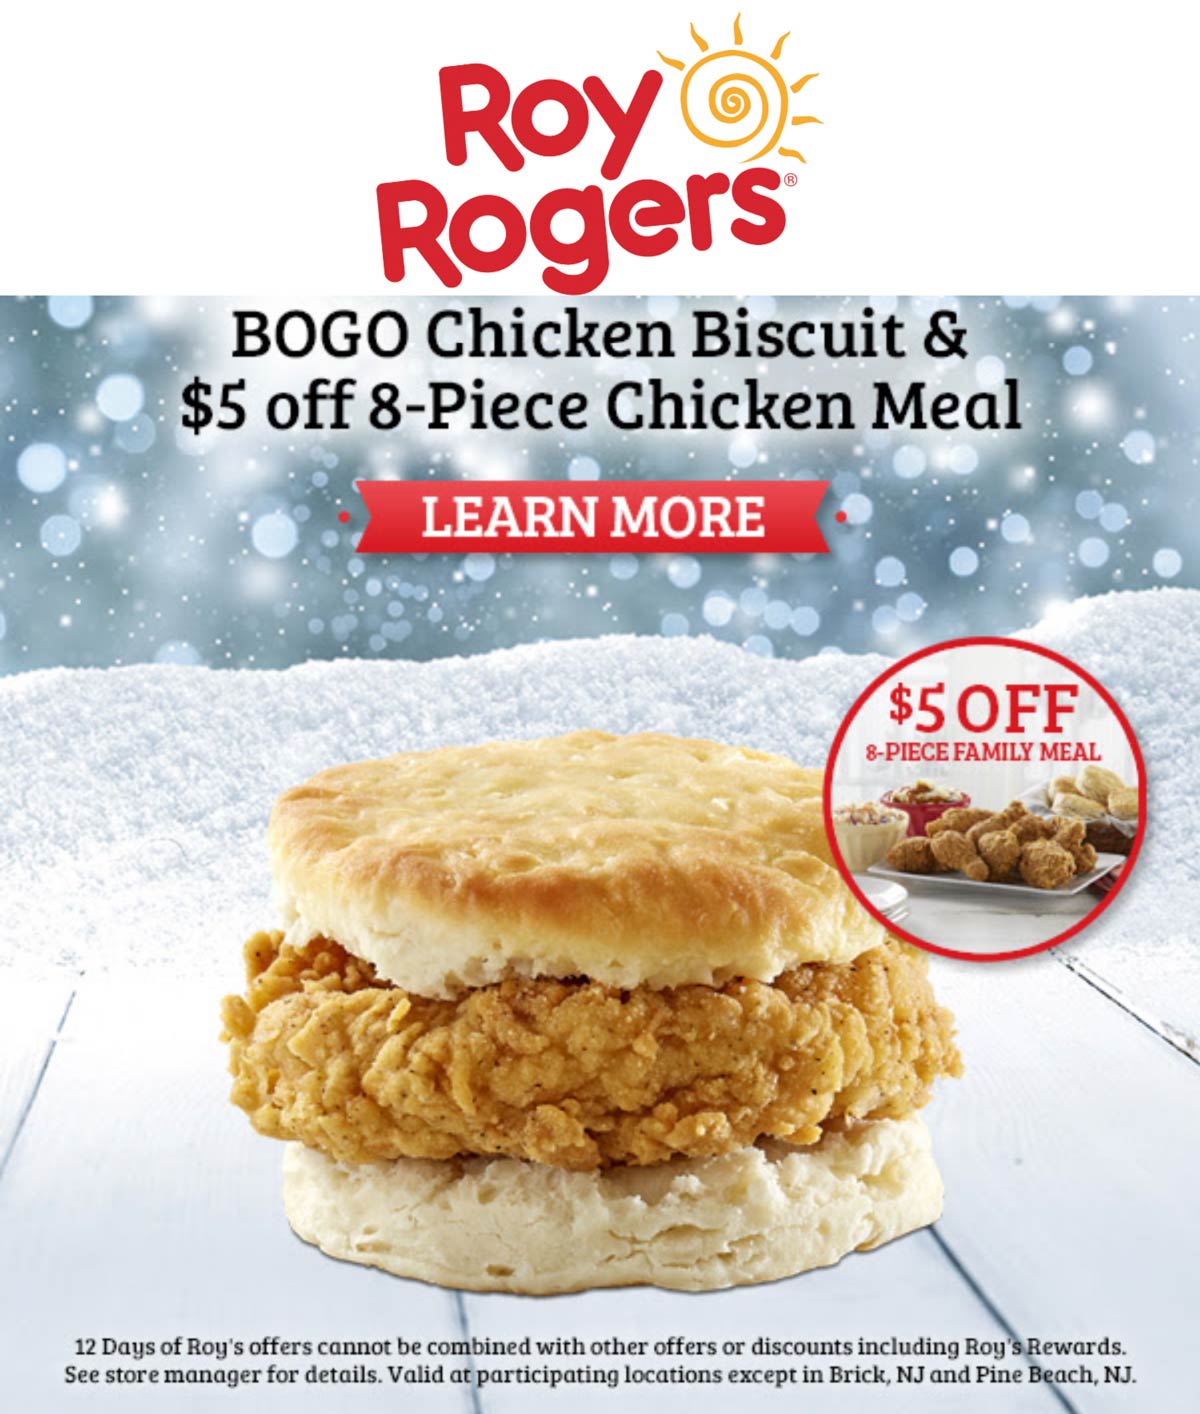 Roy Rogers restaurants Coupon  Second chicken biscuit free & $5 off 8pc chicken today at Roy Rogers #royrogers 